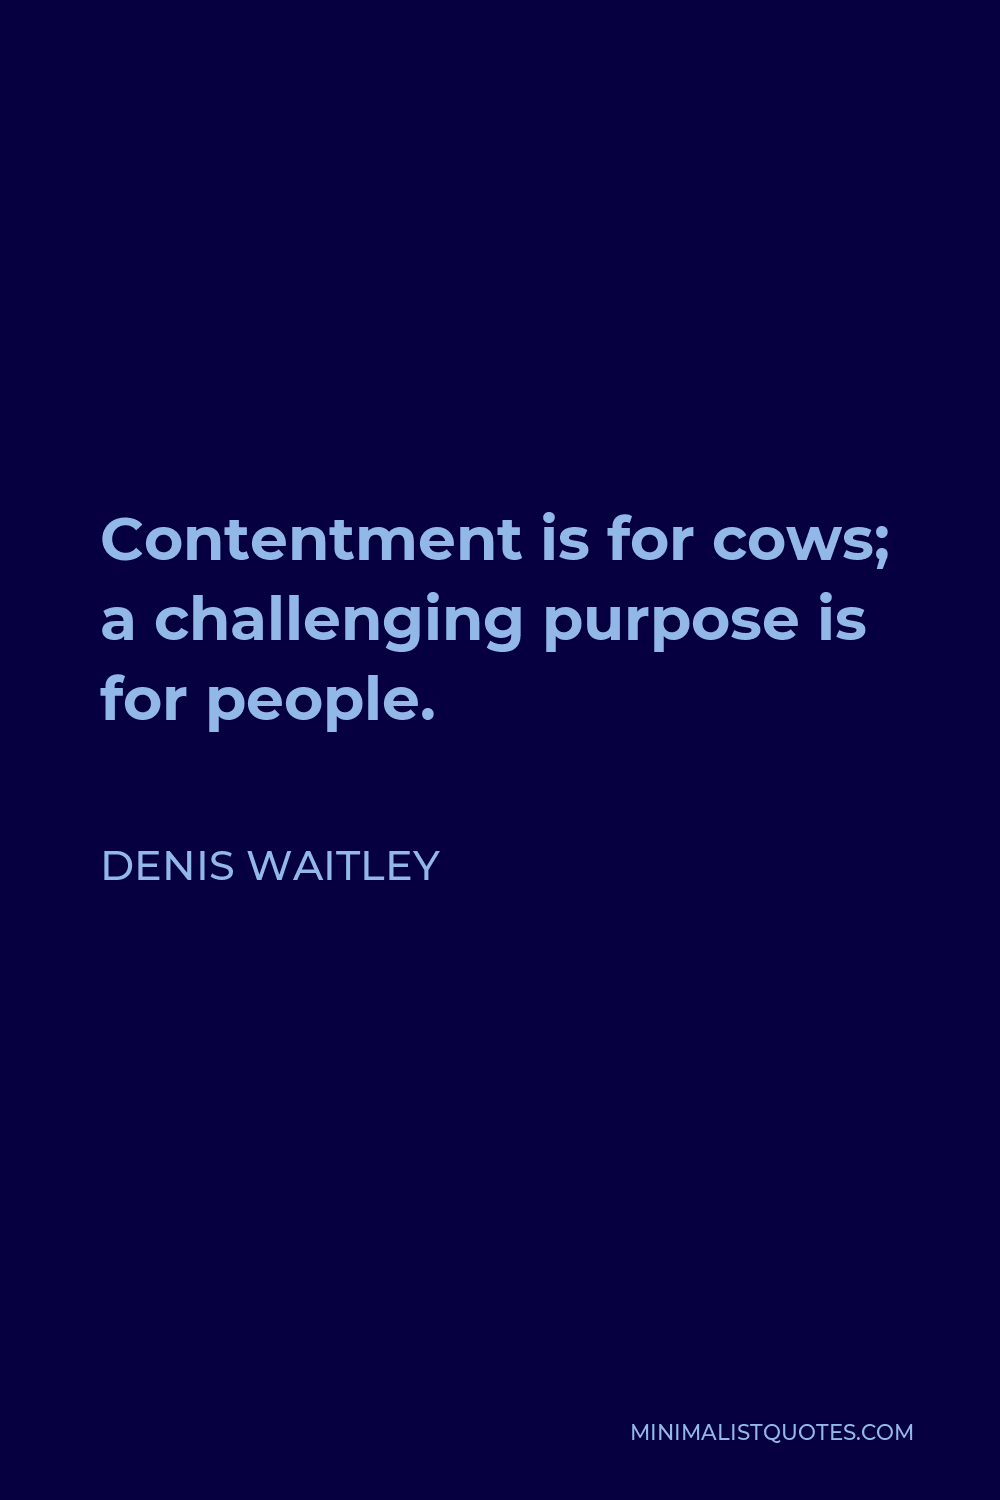 Denis Waitley Quote - Contentment is for cows; a challenging purpose is for people.